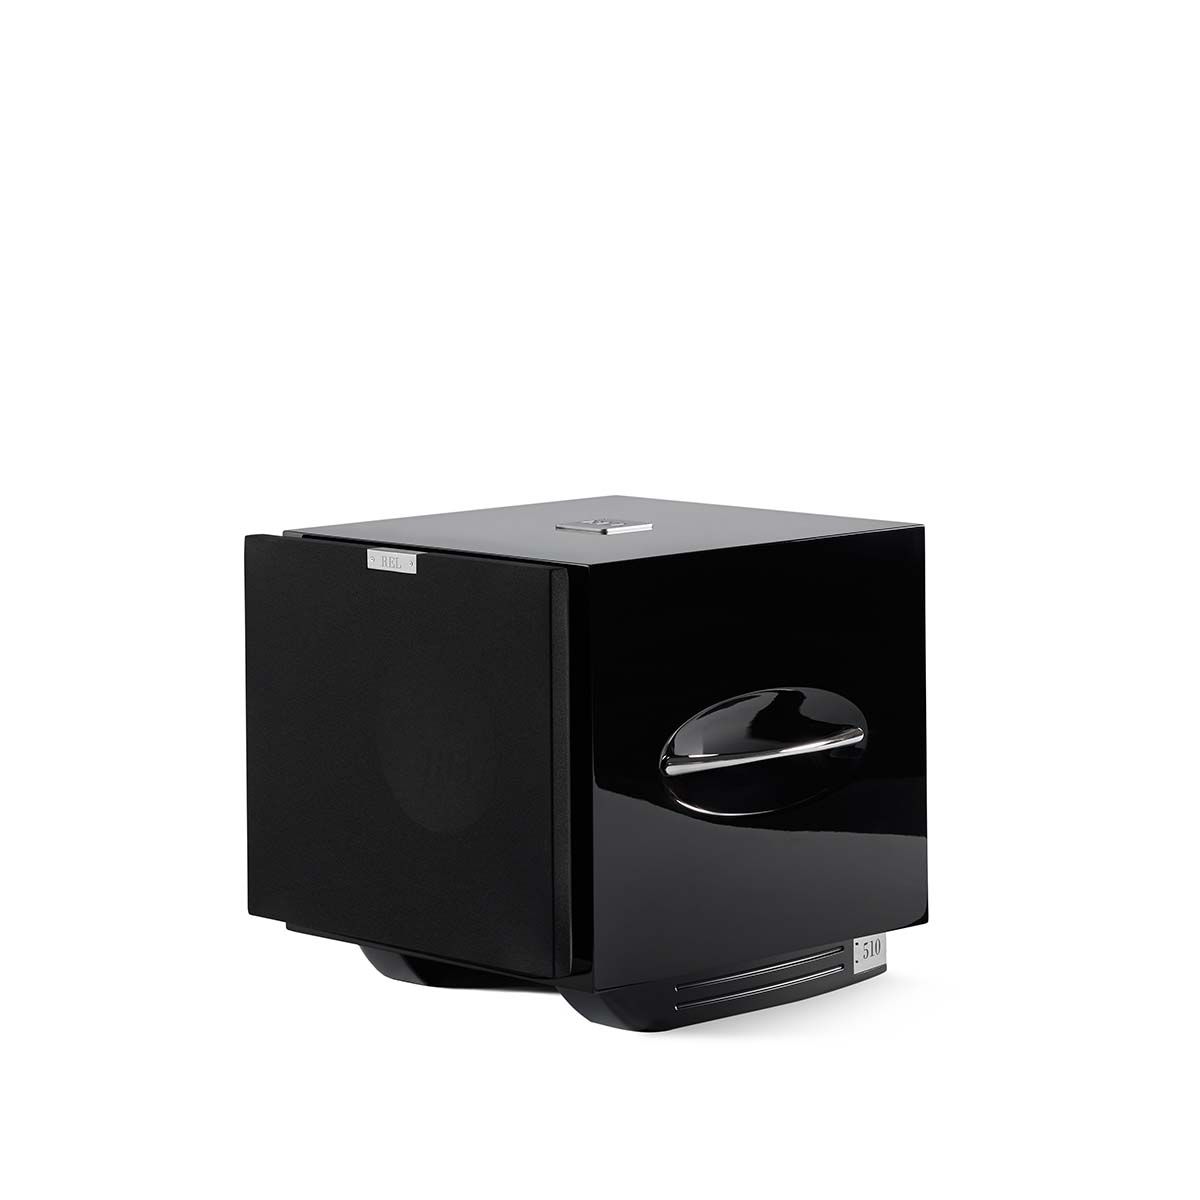 REL Acoustics S/510 Subwoofer, Black, front angle with grille